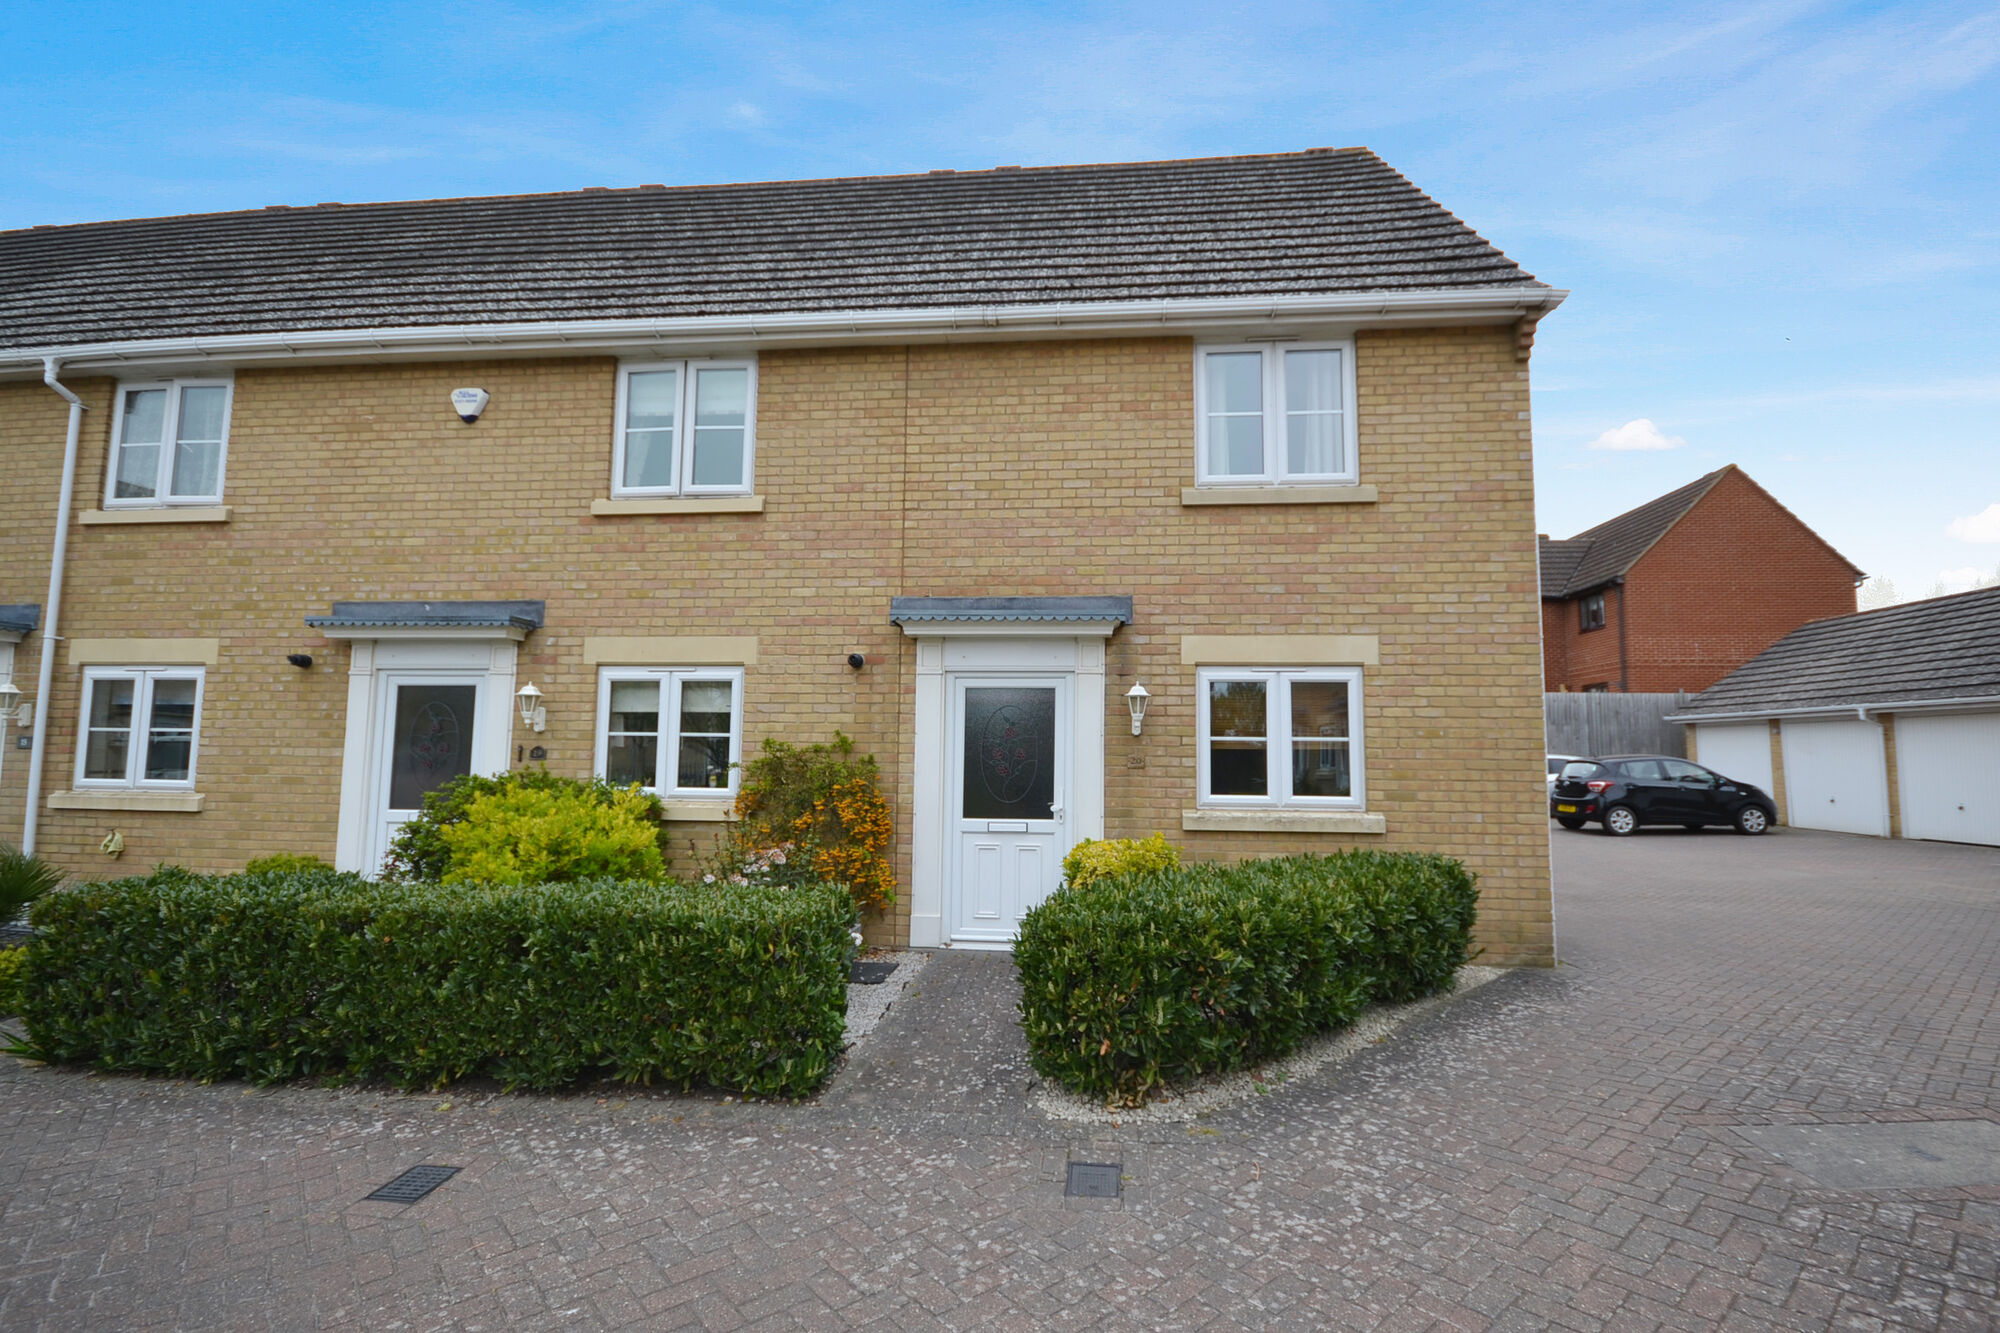 2 bedroom  house to rent, Available now Maple Way, Dunmow, CM6, main image